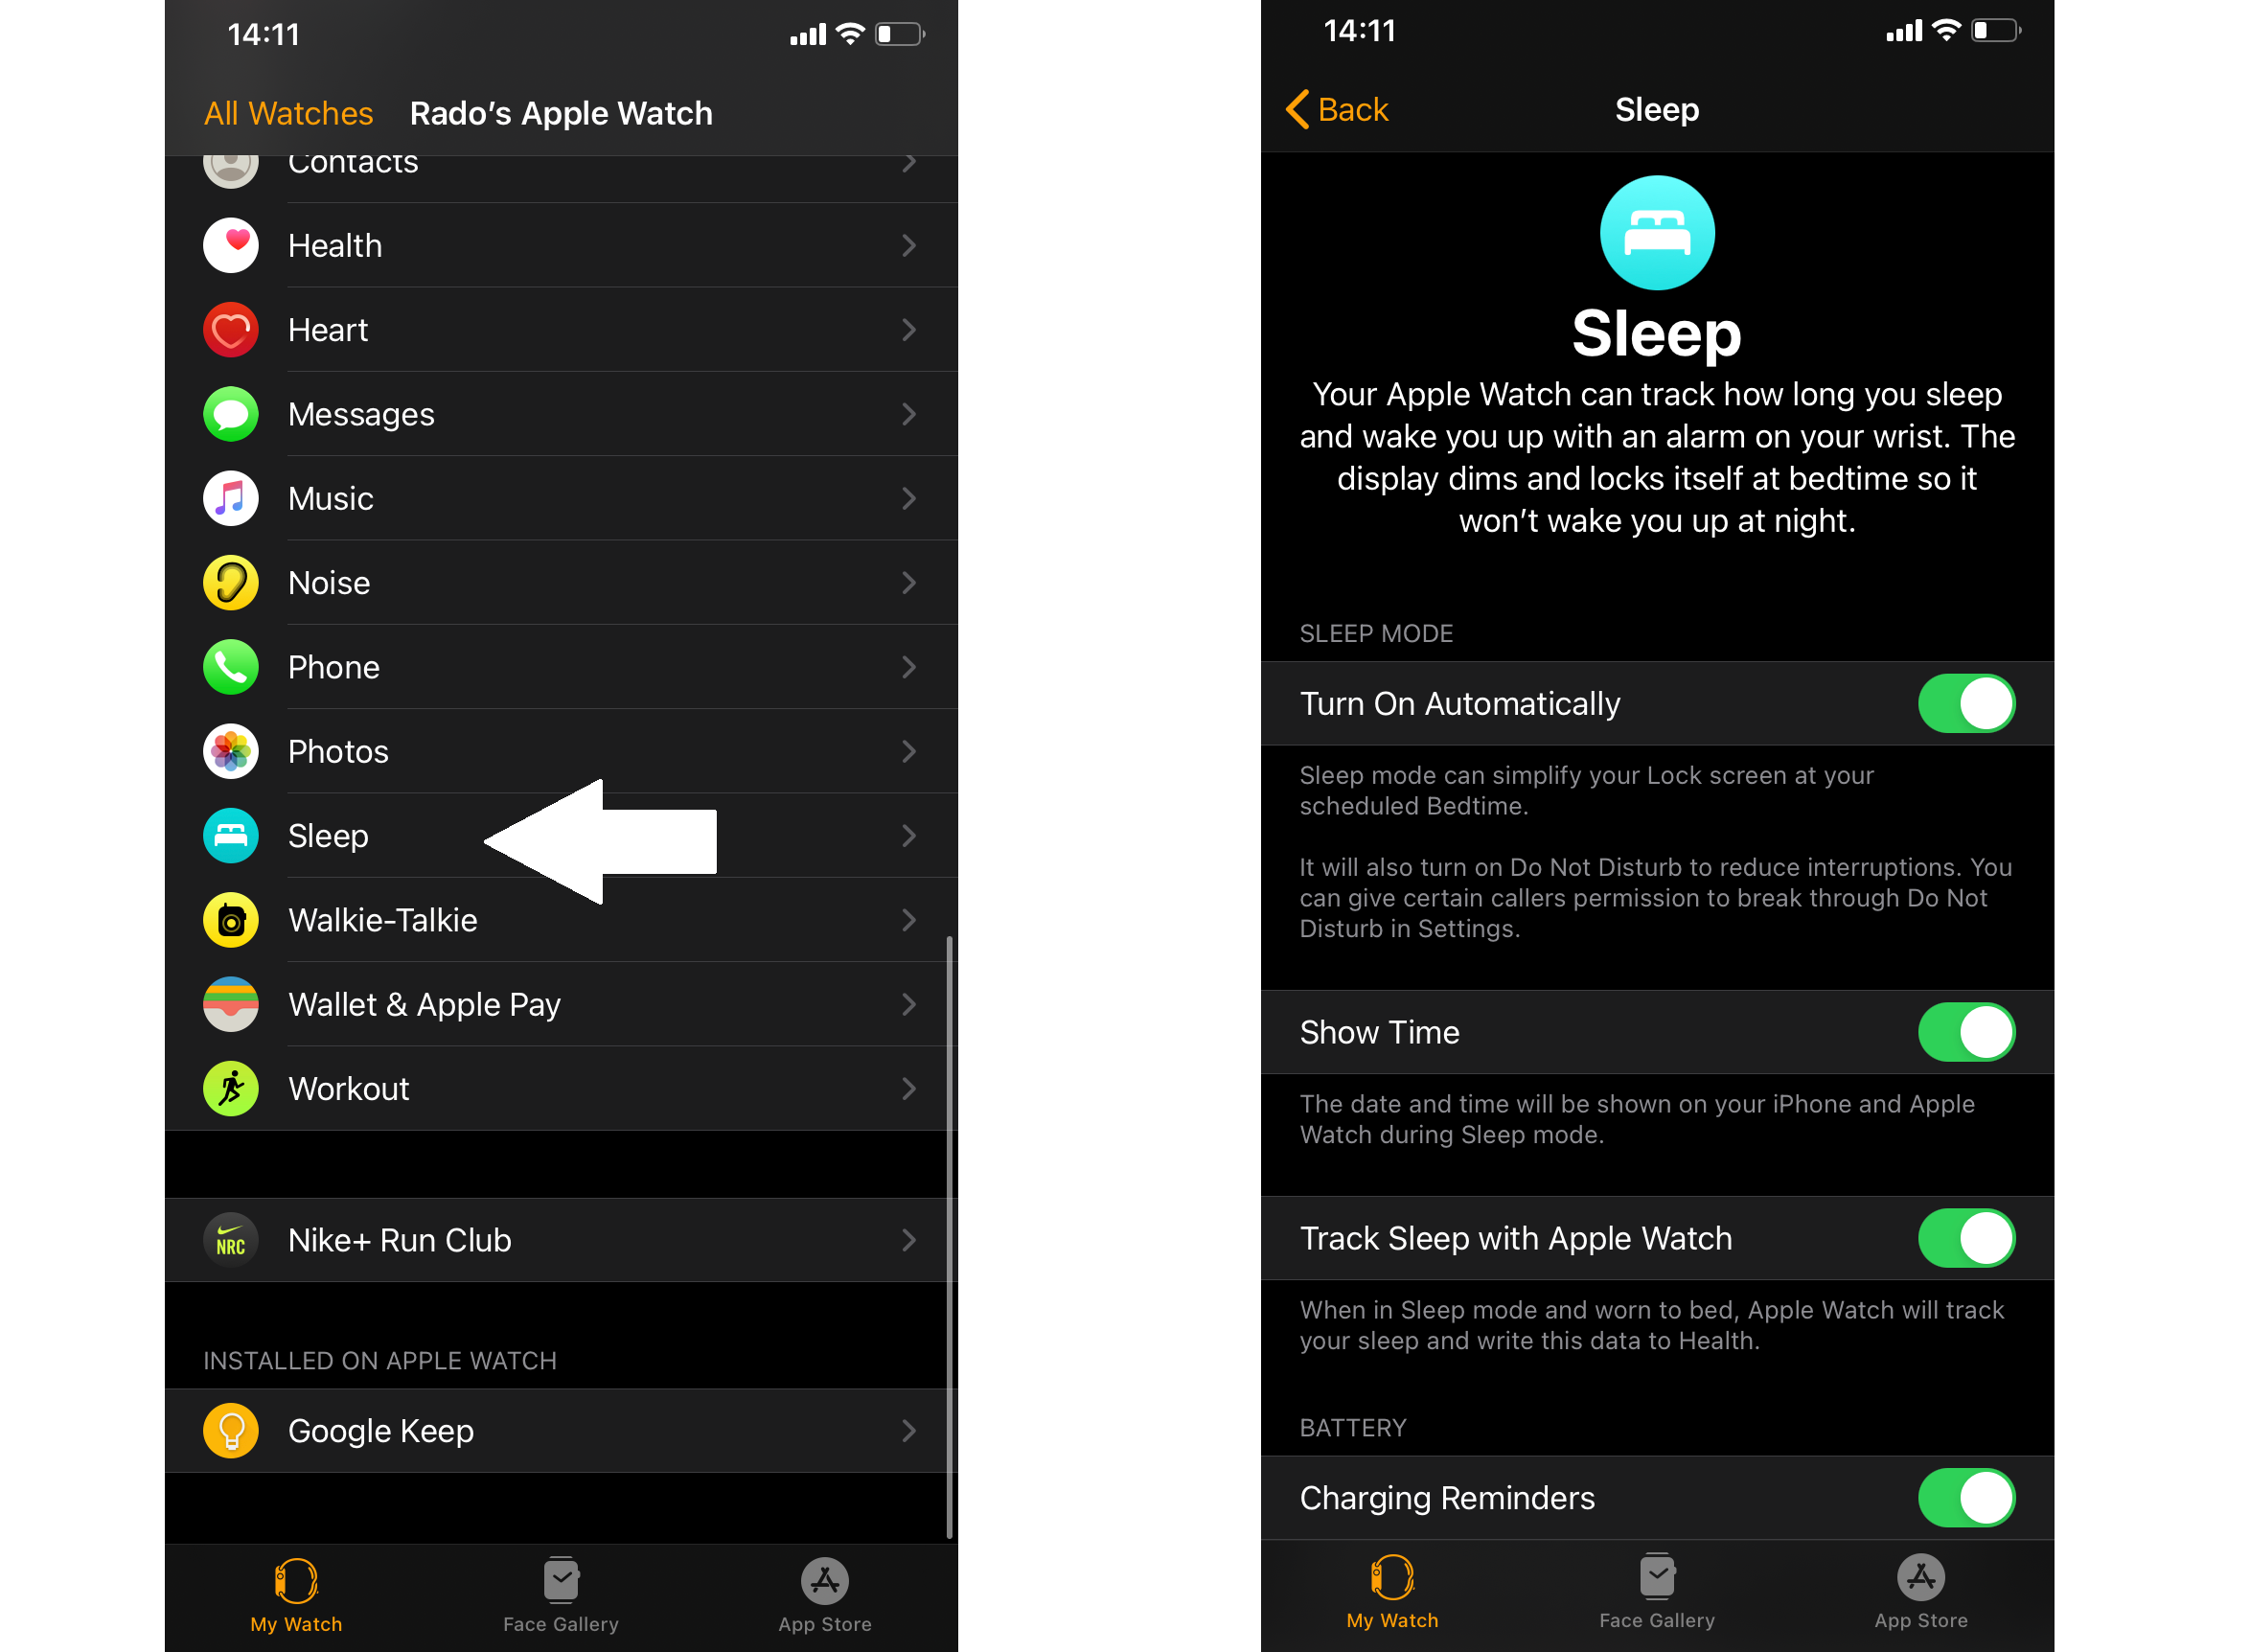 The new Sleep menu that will appear on the Apple Watch iPhone app, along with its only screen - Apple Watch sleep tracking is here! This is how it works